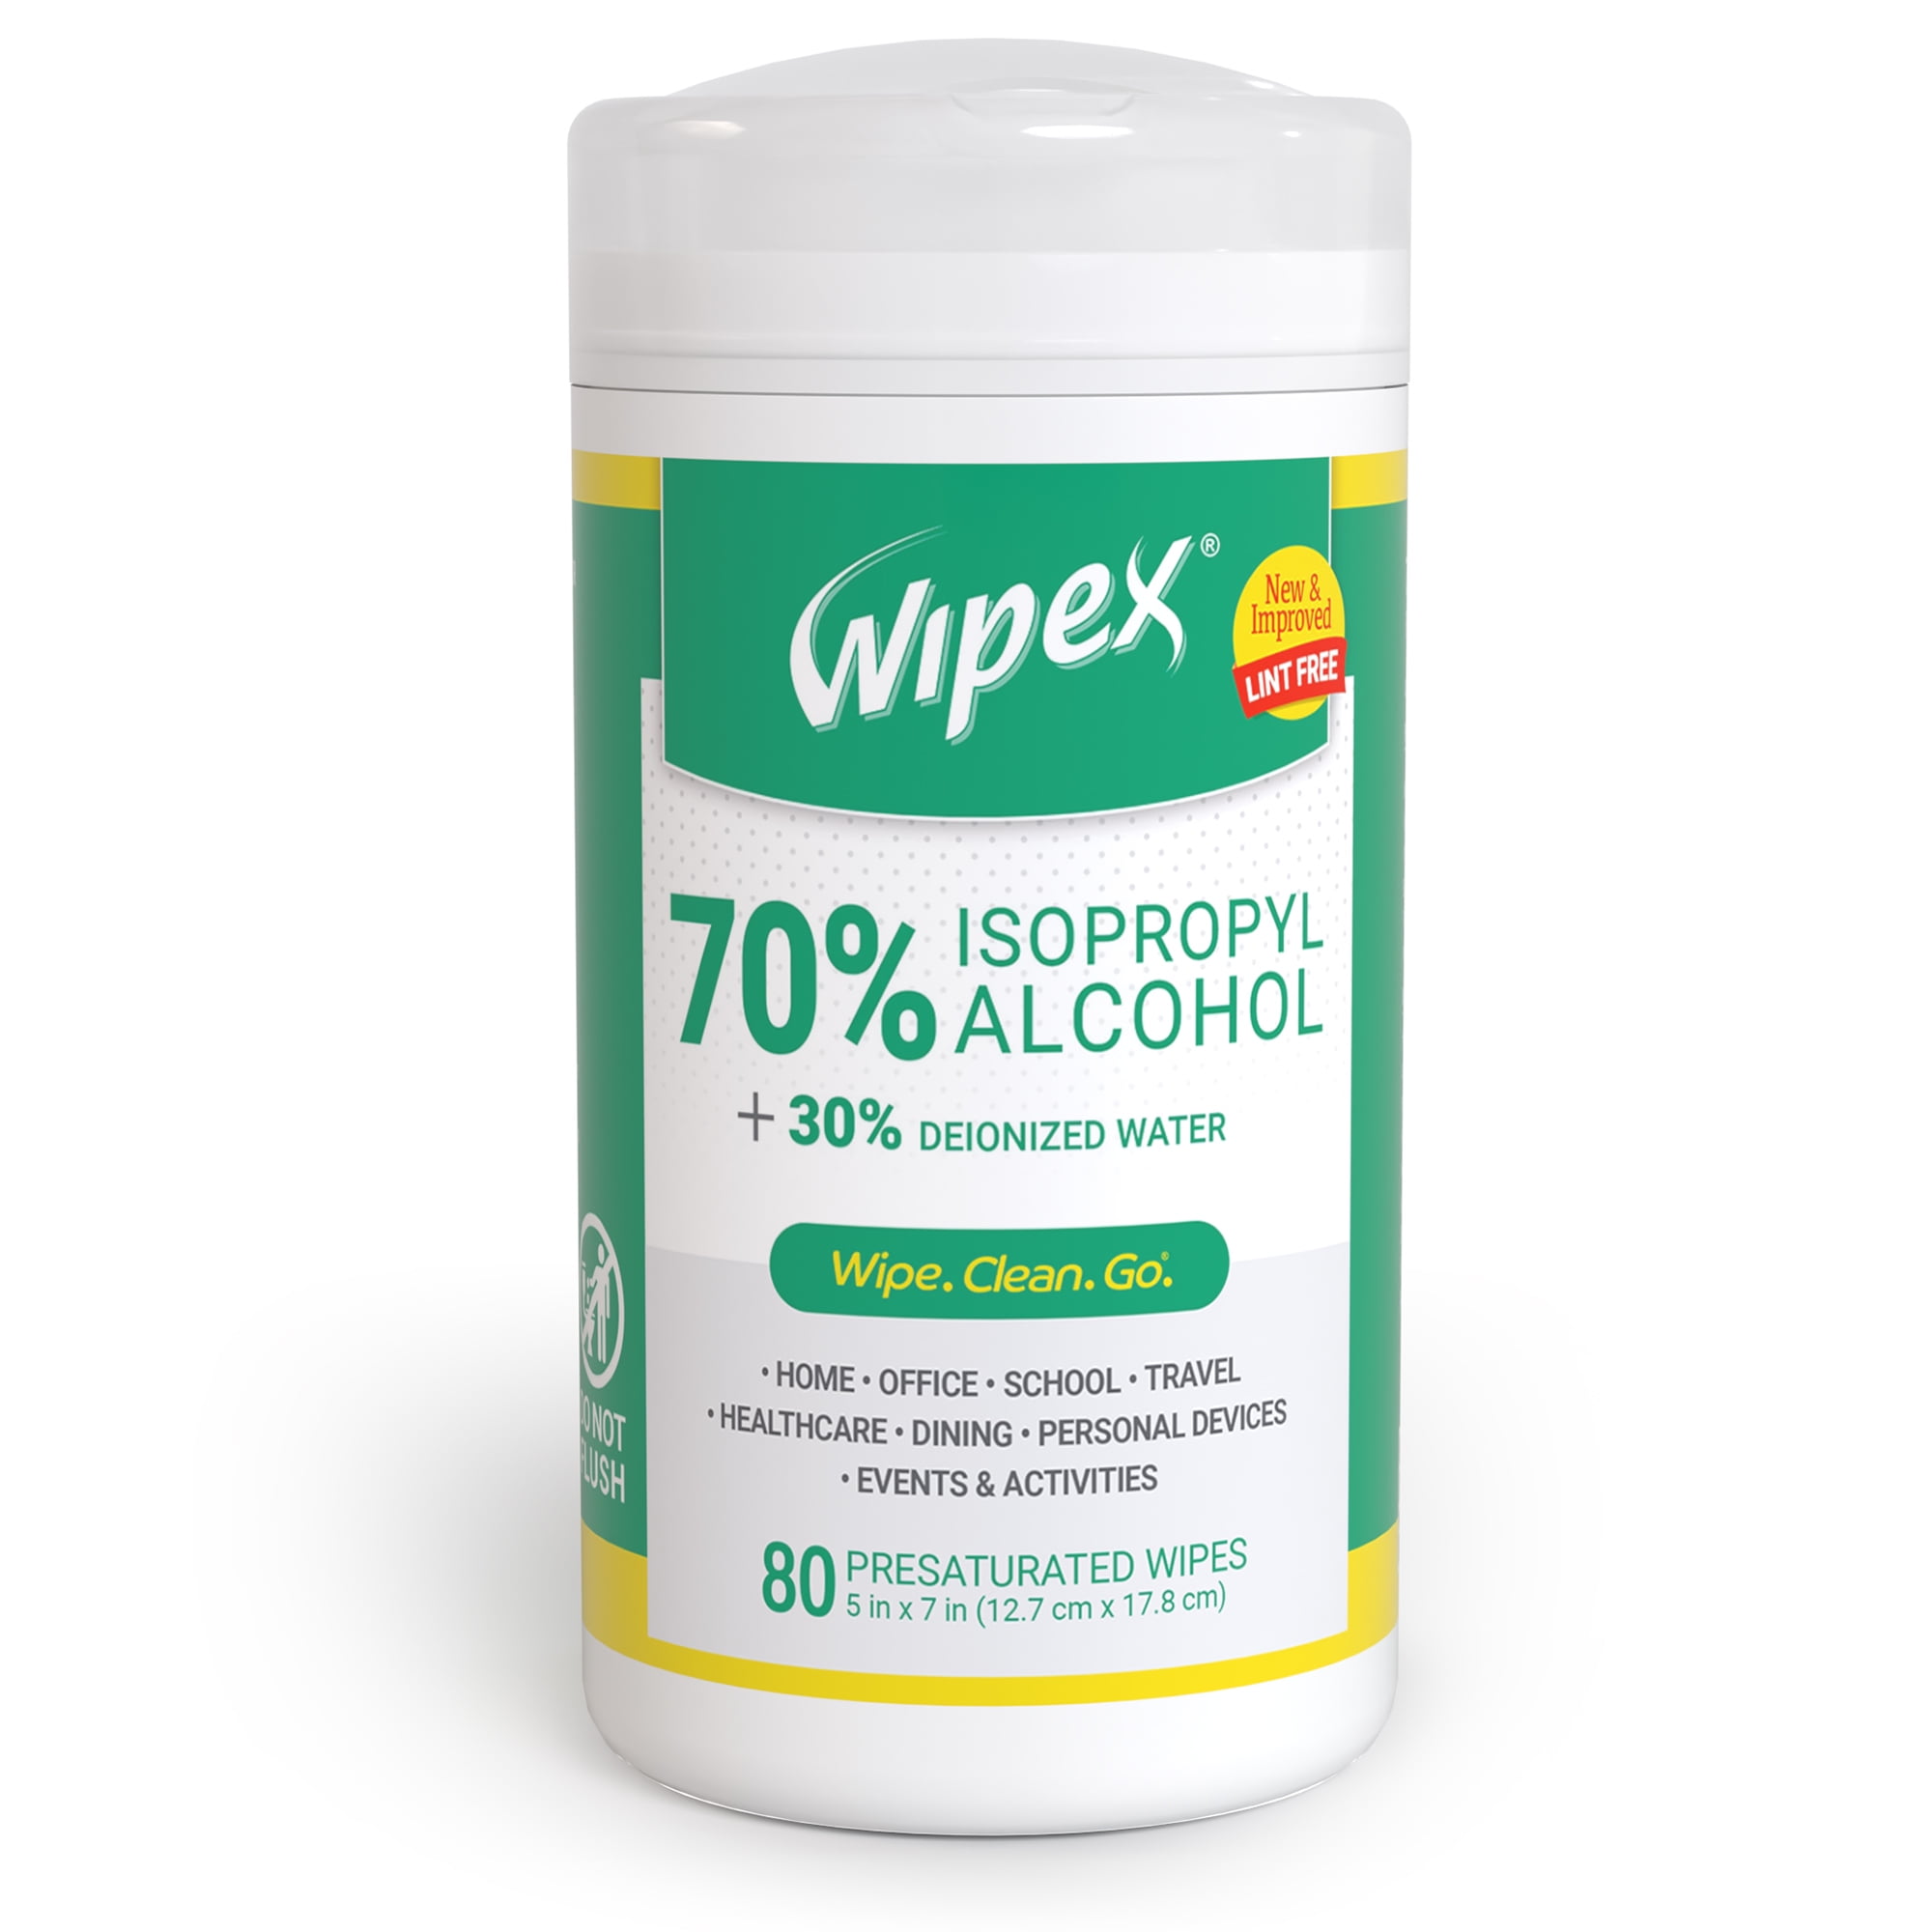 Wipex 70% Isopropyl Alcohol Wipes (IPA) 80ct. Canister, 1pk 